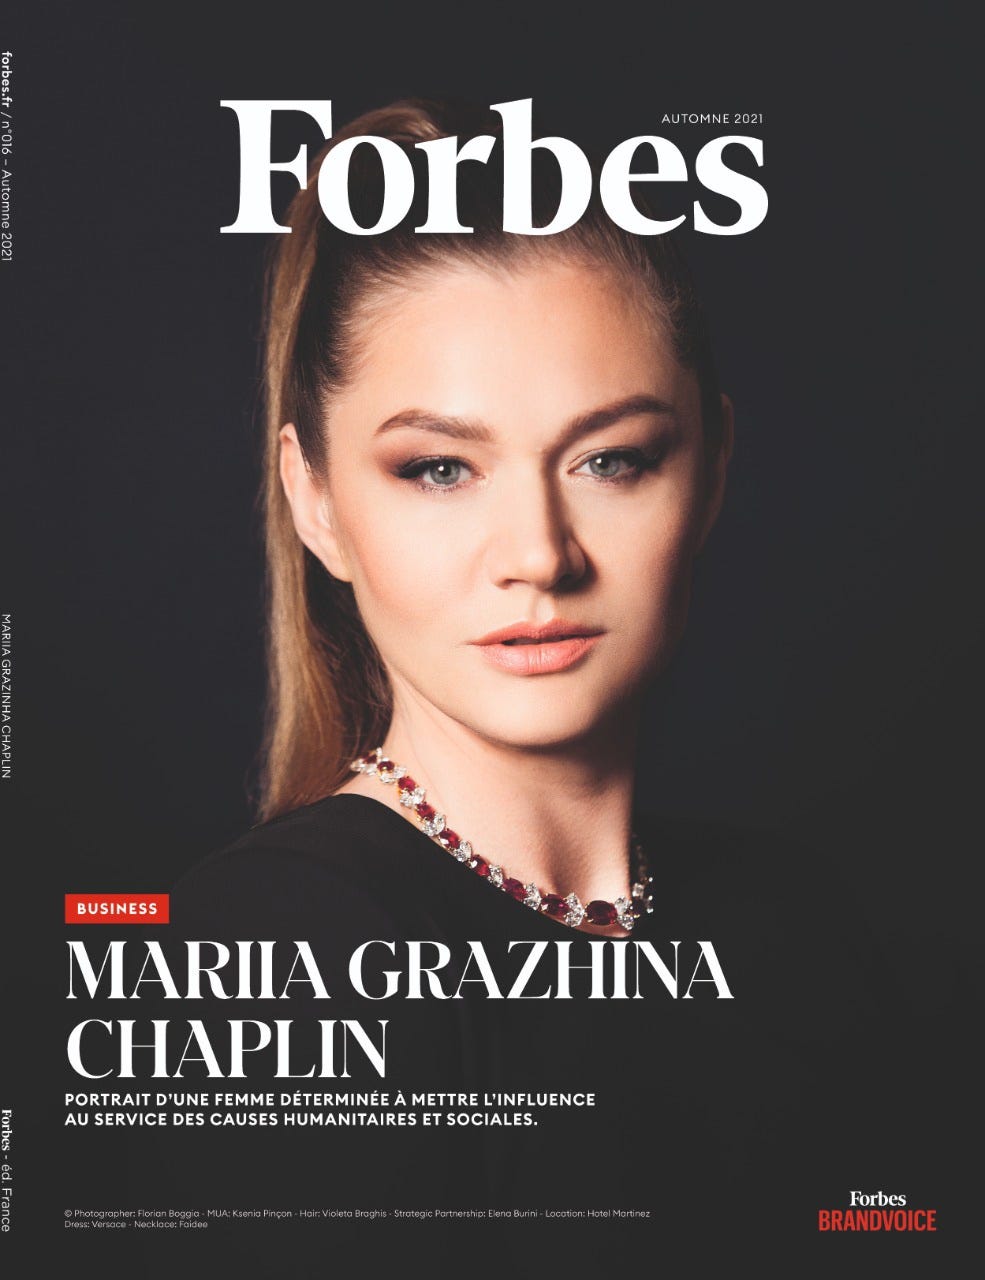 Mariia Grazhina Chaplin at the Cover of the Forbes